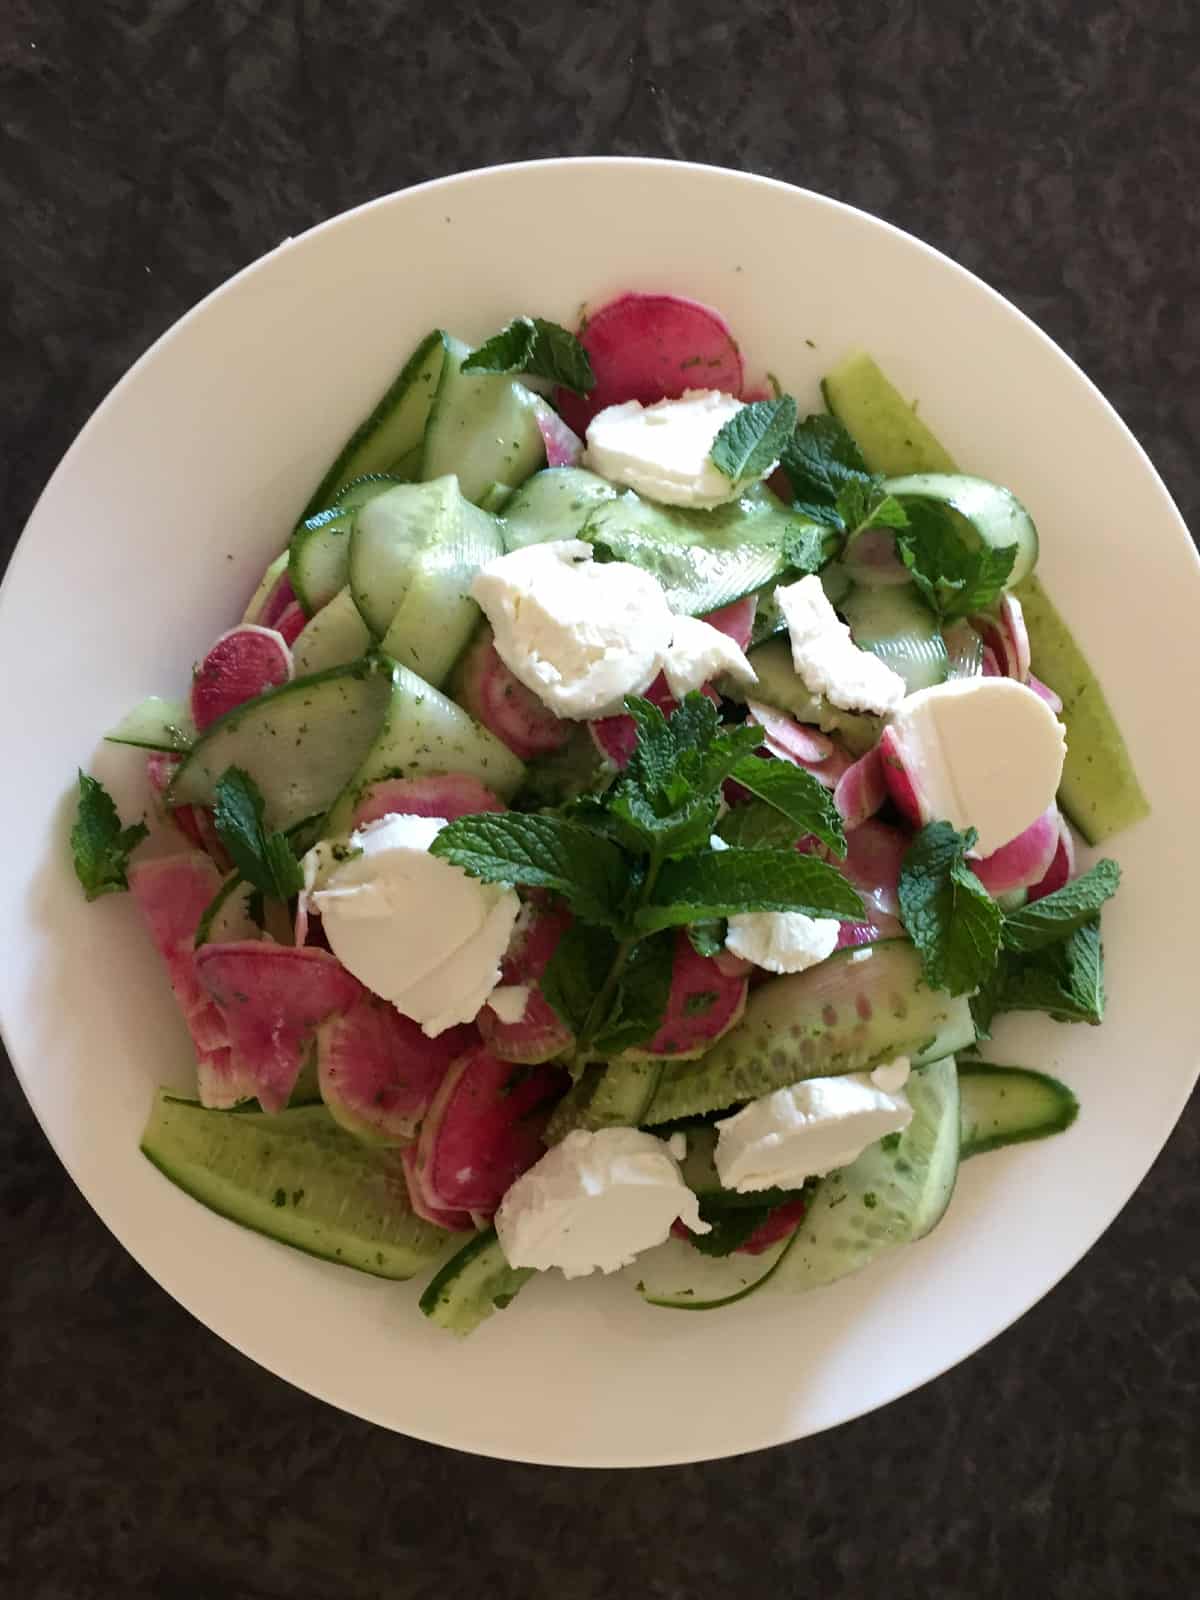 WATERMELON RADISH SALAD WITH CUCUMBER, GOATS CHEESE AND MINTY VINAIGRETTE